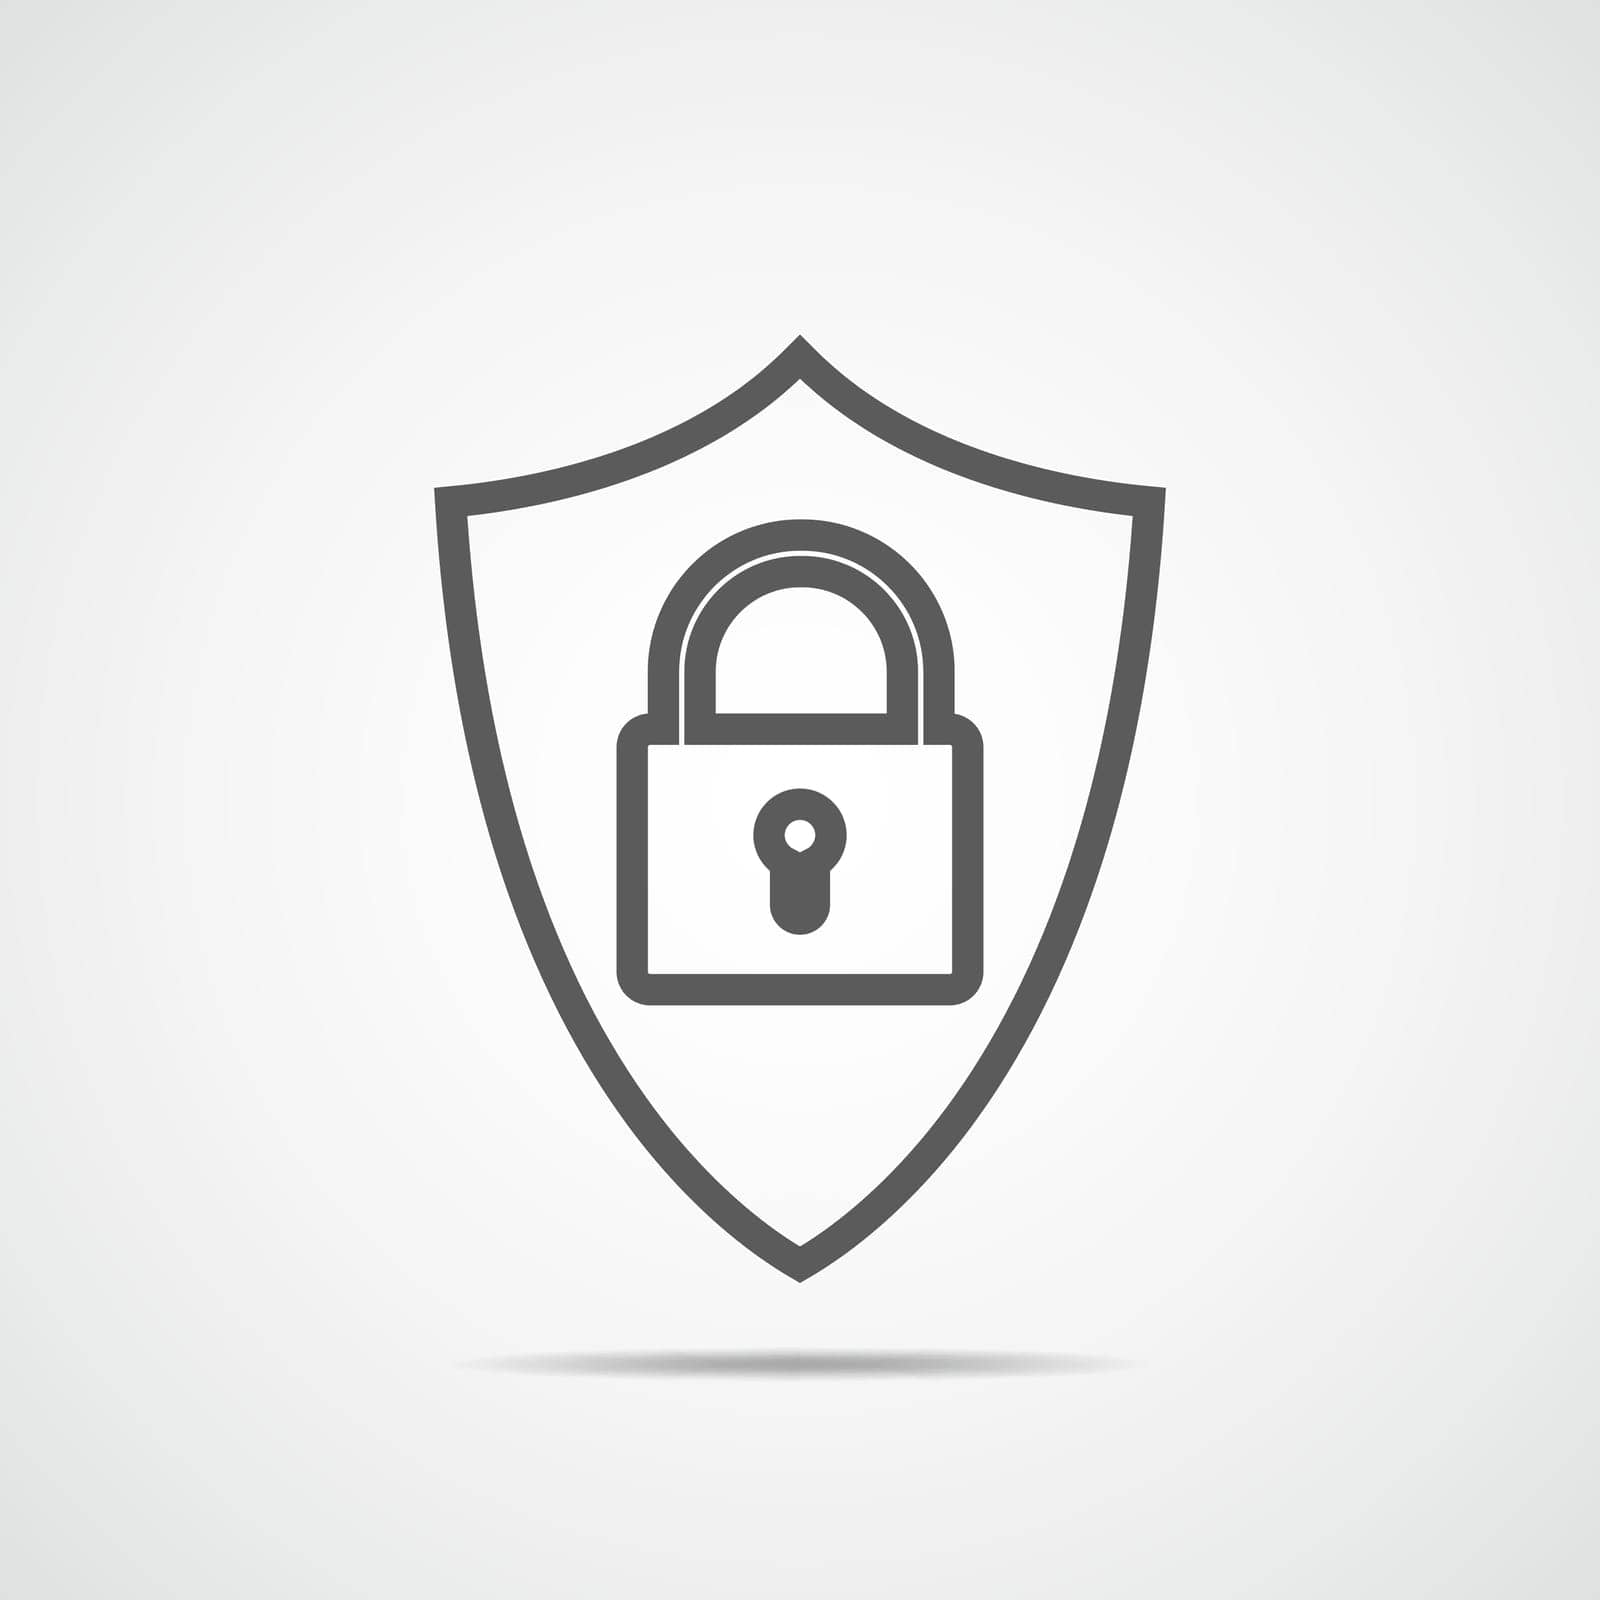 Security icon. Shield with lock. Vector illustration. Protection icon in flat design.